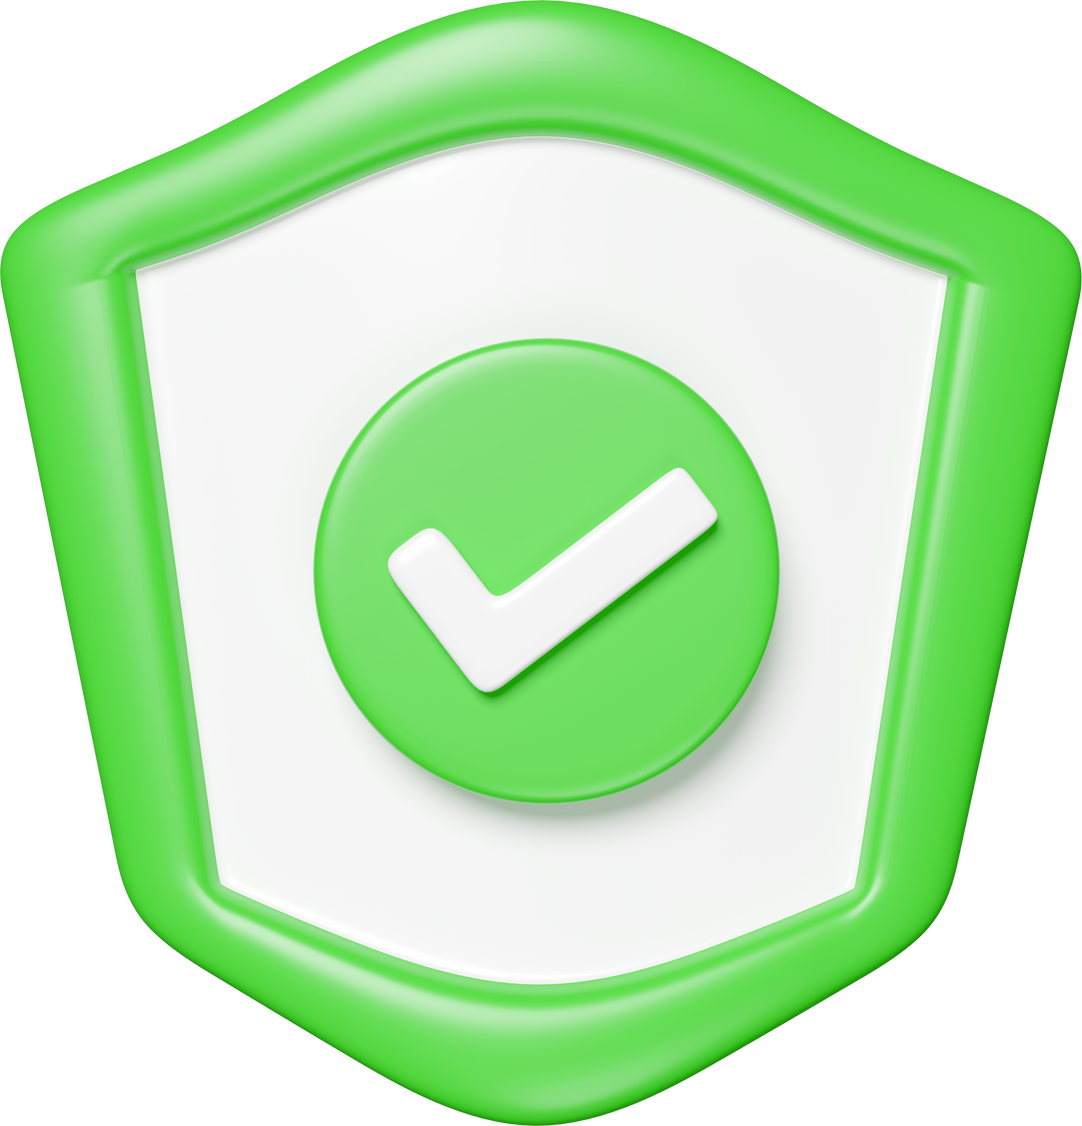 3d green shield with checkmark icon isolated. Internet security or privacy protection or ransomware protect concept, 3d render illustration